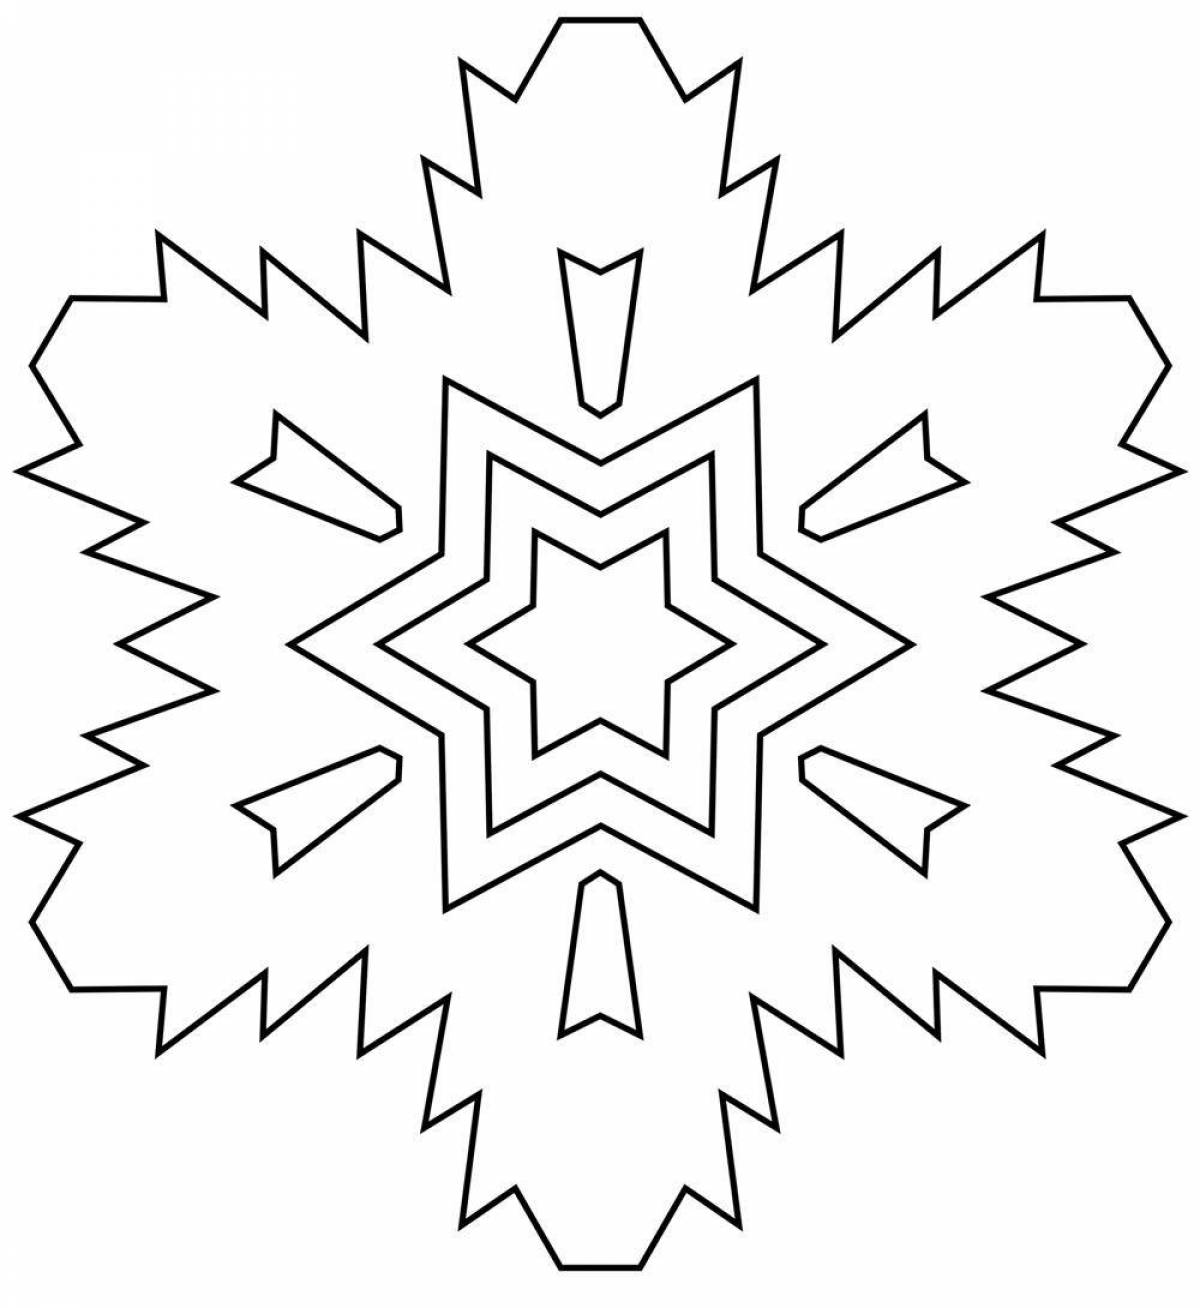 Radiant snowflake coloring for children 4-5 years old in kindergarten